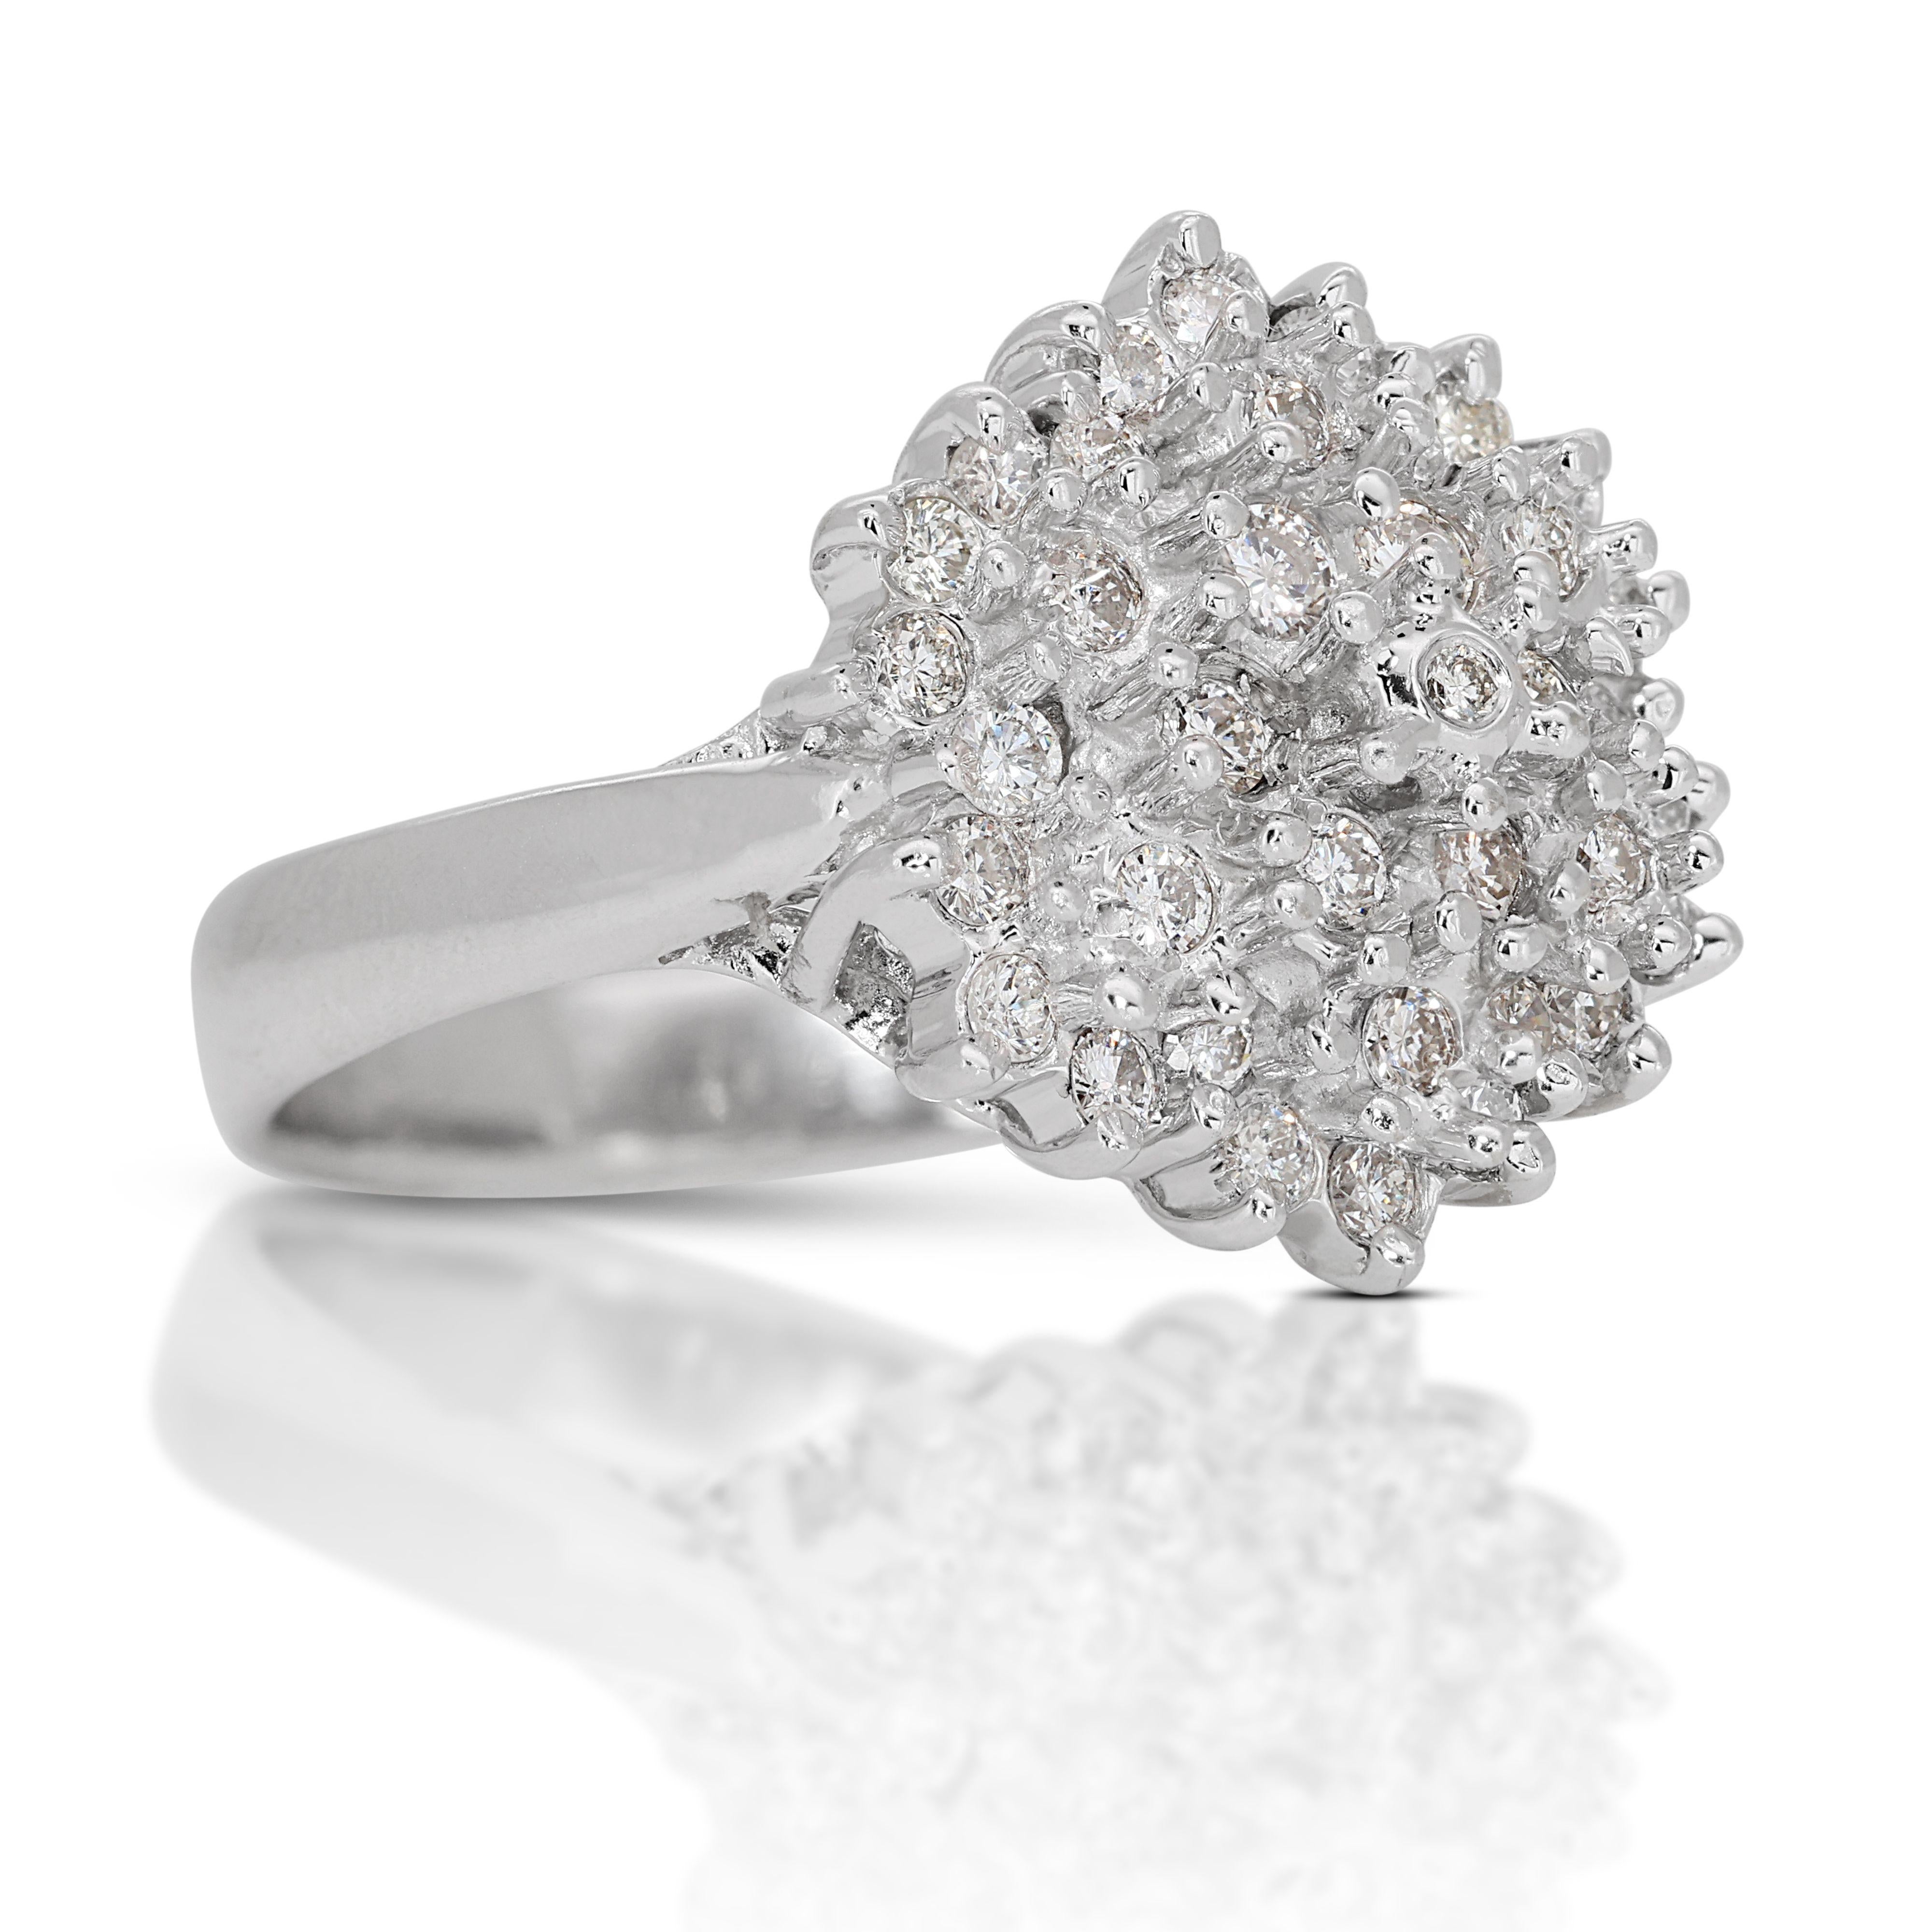 Women's Stunning 18k White Gold Cluster Flower Ring with 2.22 Carat Natural Diamonds For Sale